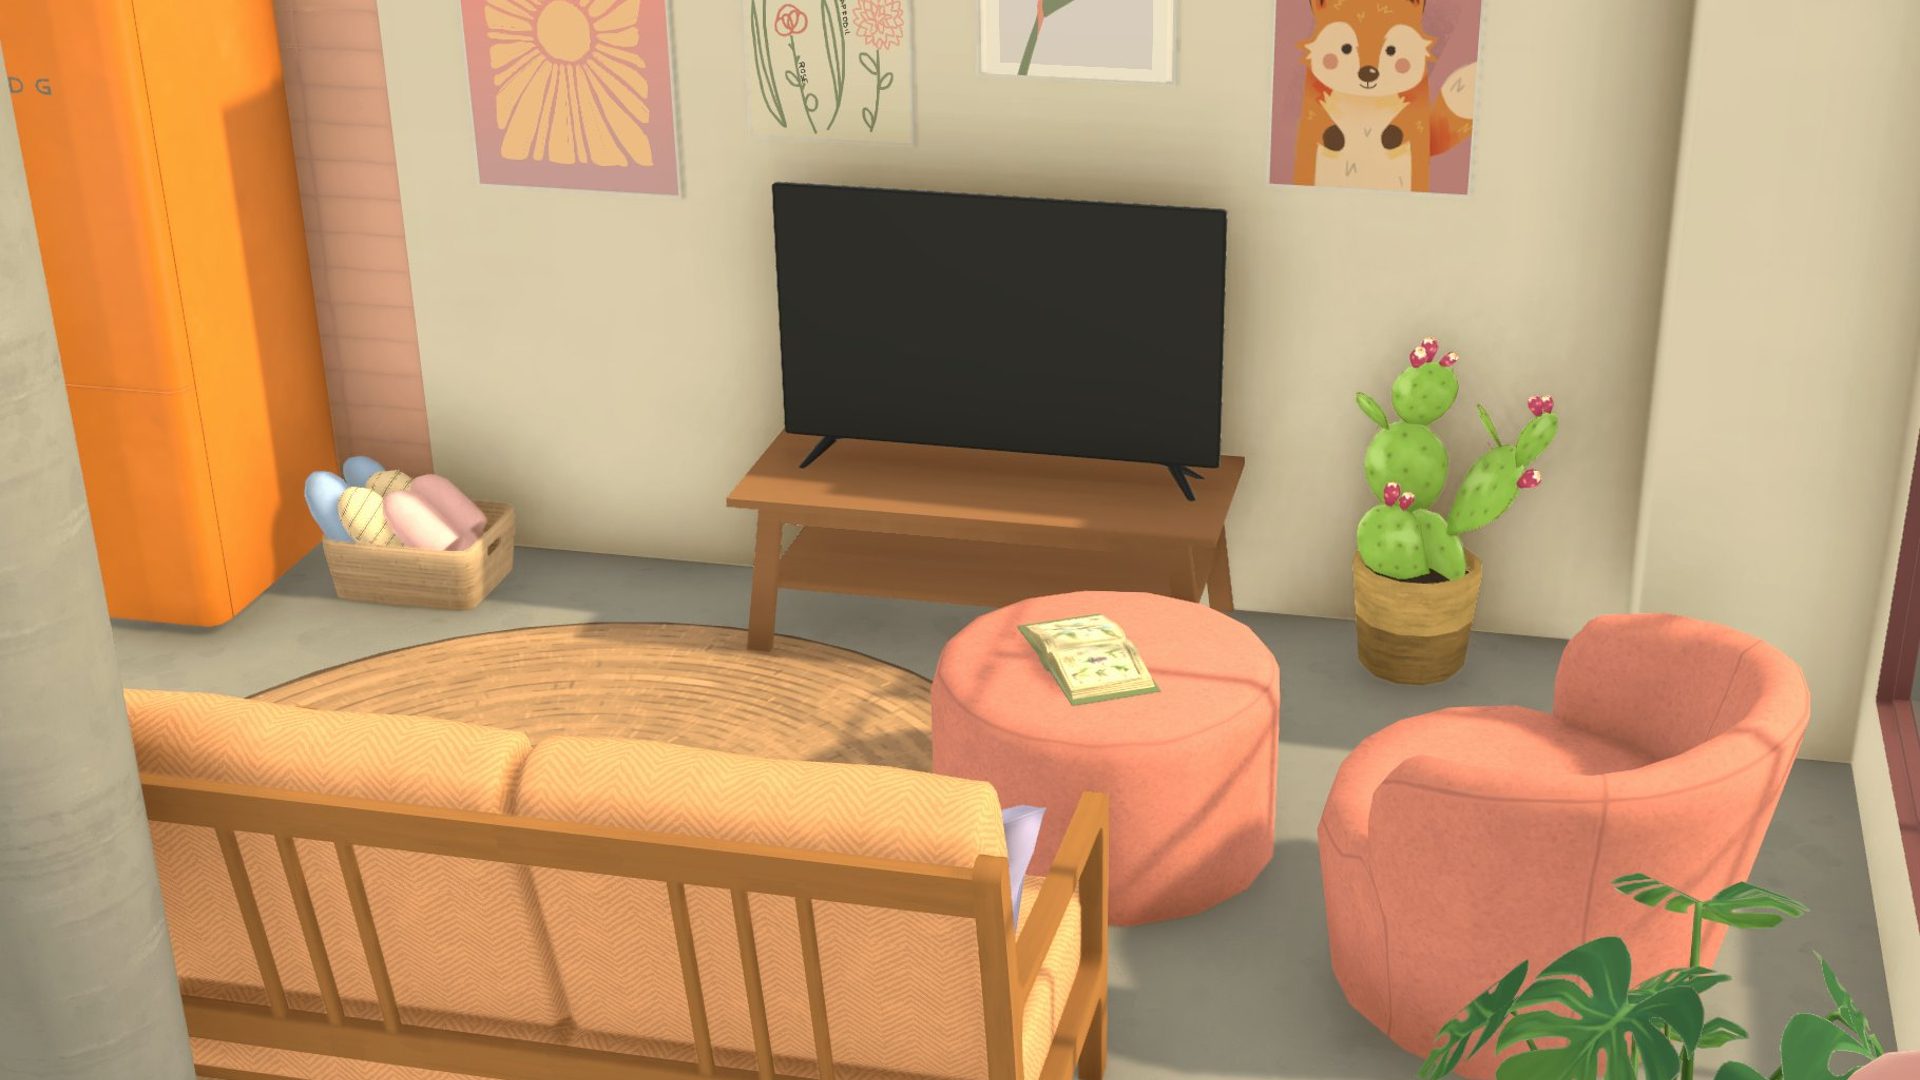 Pastel pink seating shown in a well-lit living room with a flat-screen TV and cactus plant in the background